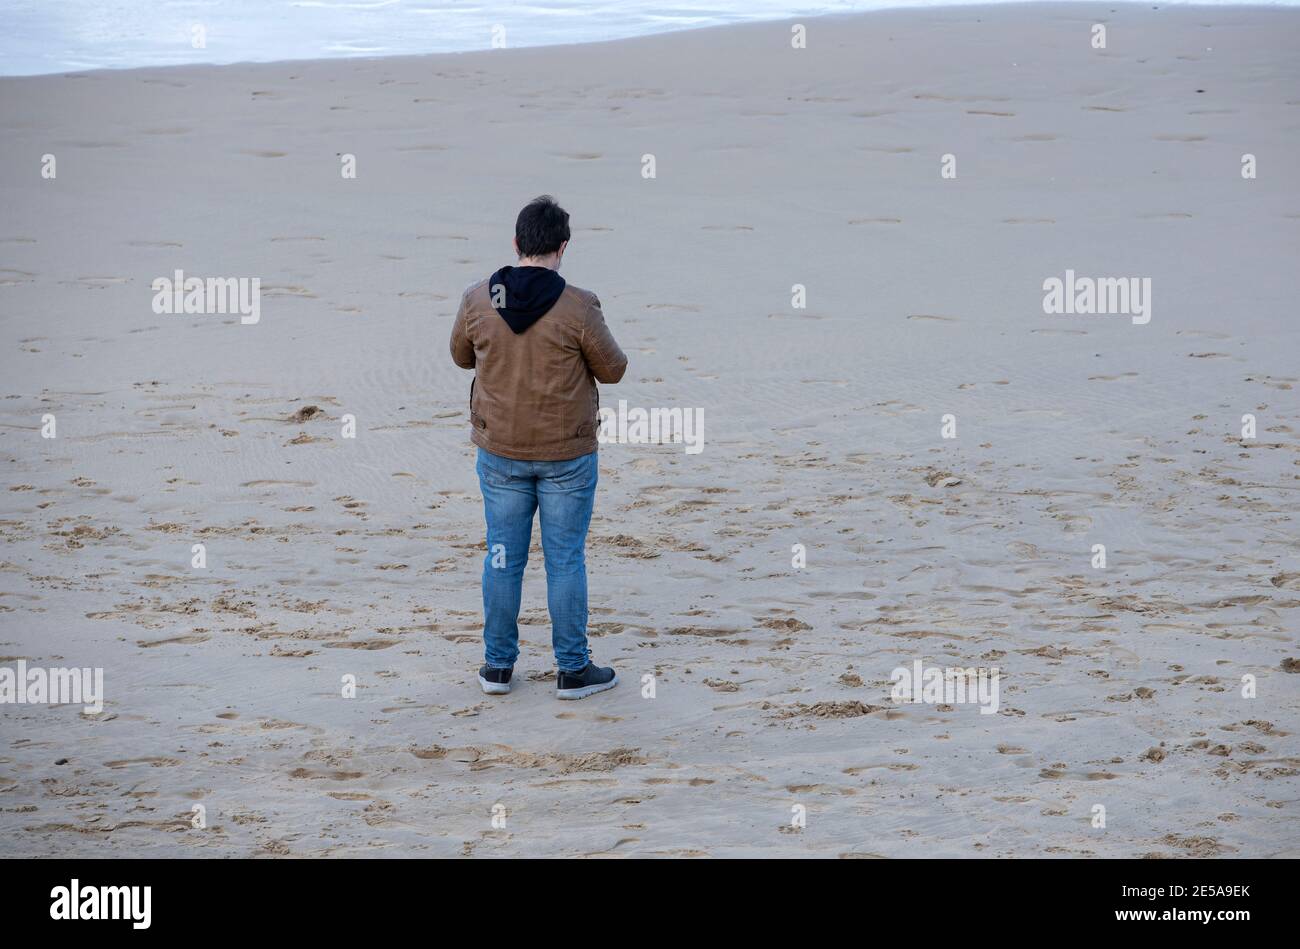 man stand on the beach sand Stock Photo